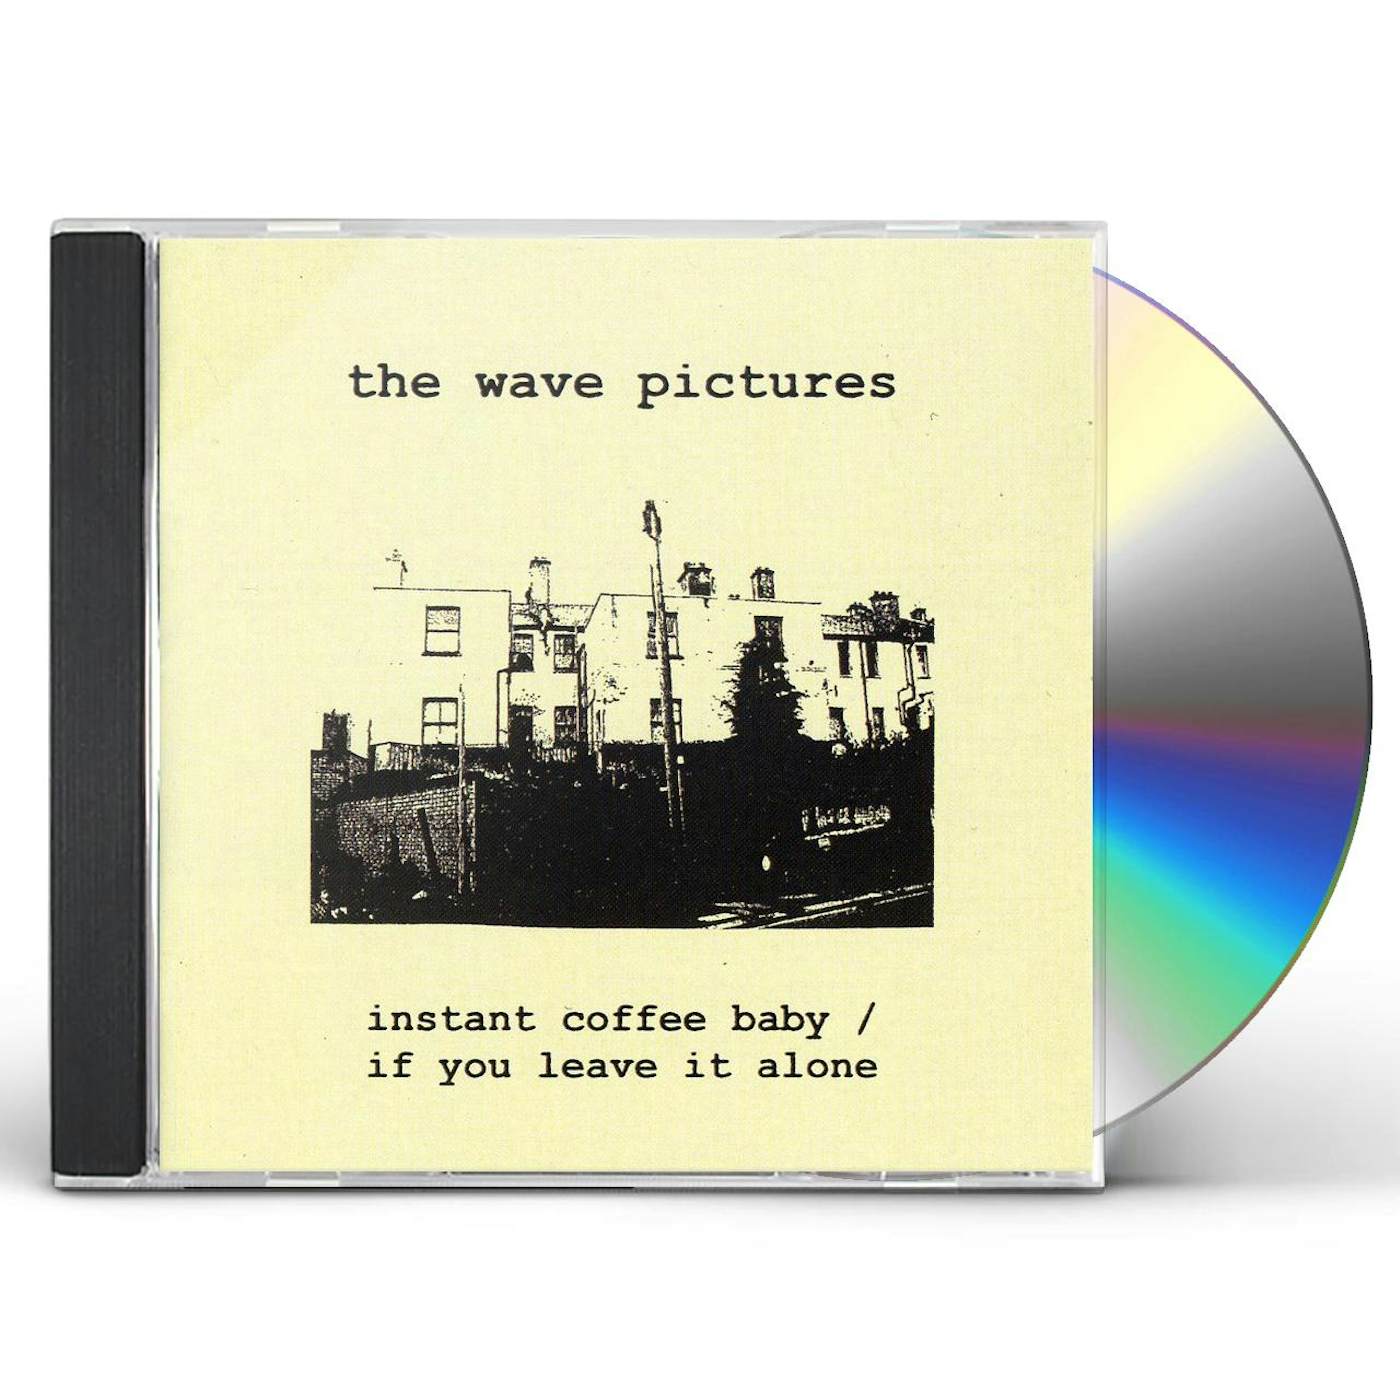 The Wave Pictures INSTANT COFFEE BABY & IF YOU LEAVE IT ALONE CD